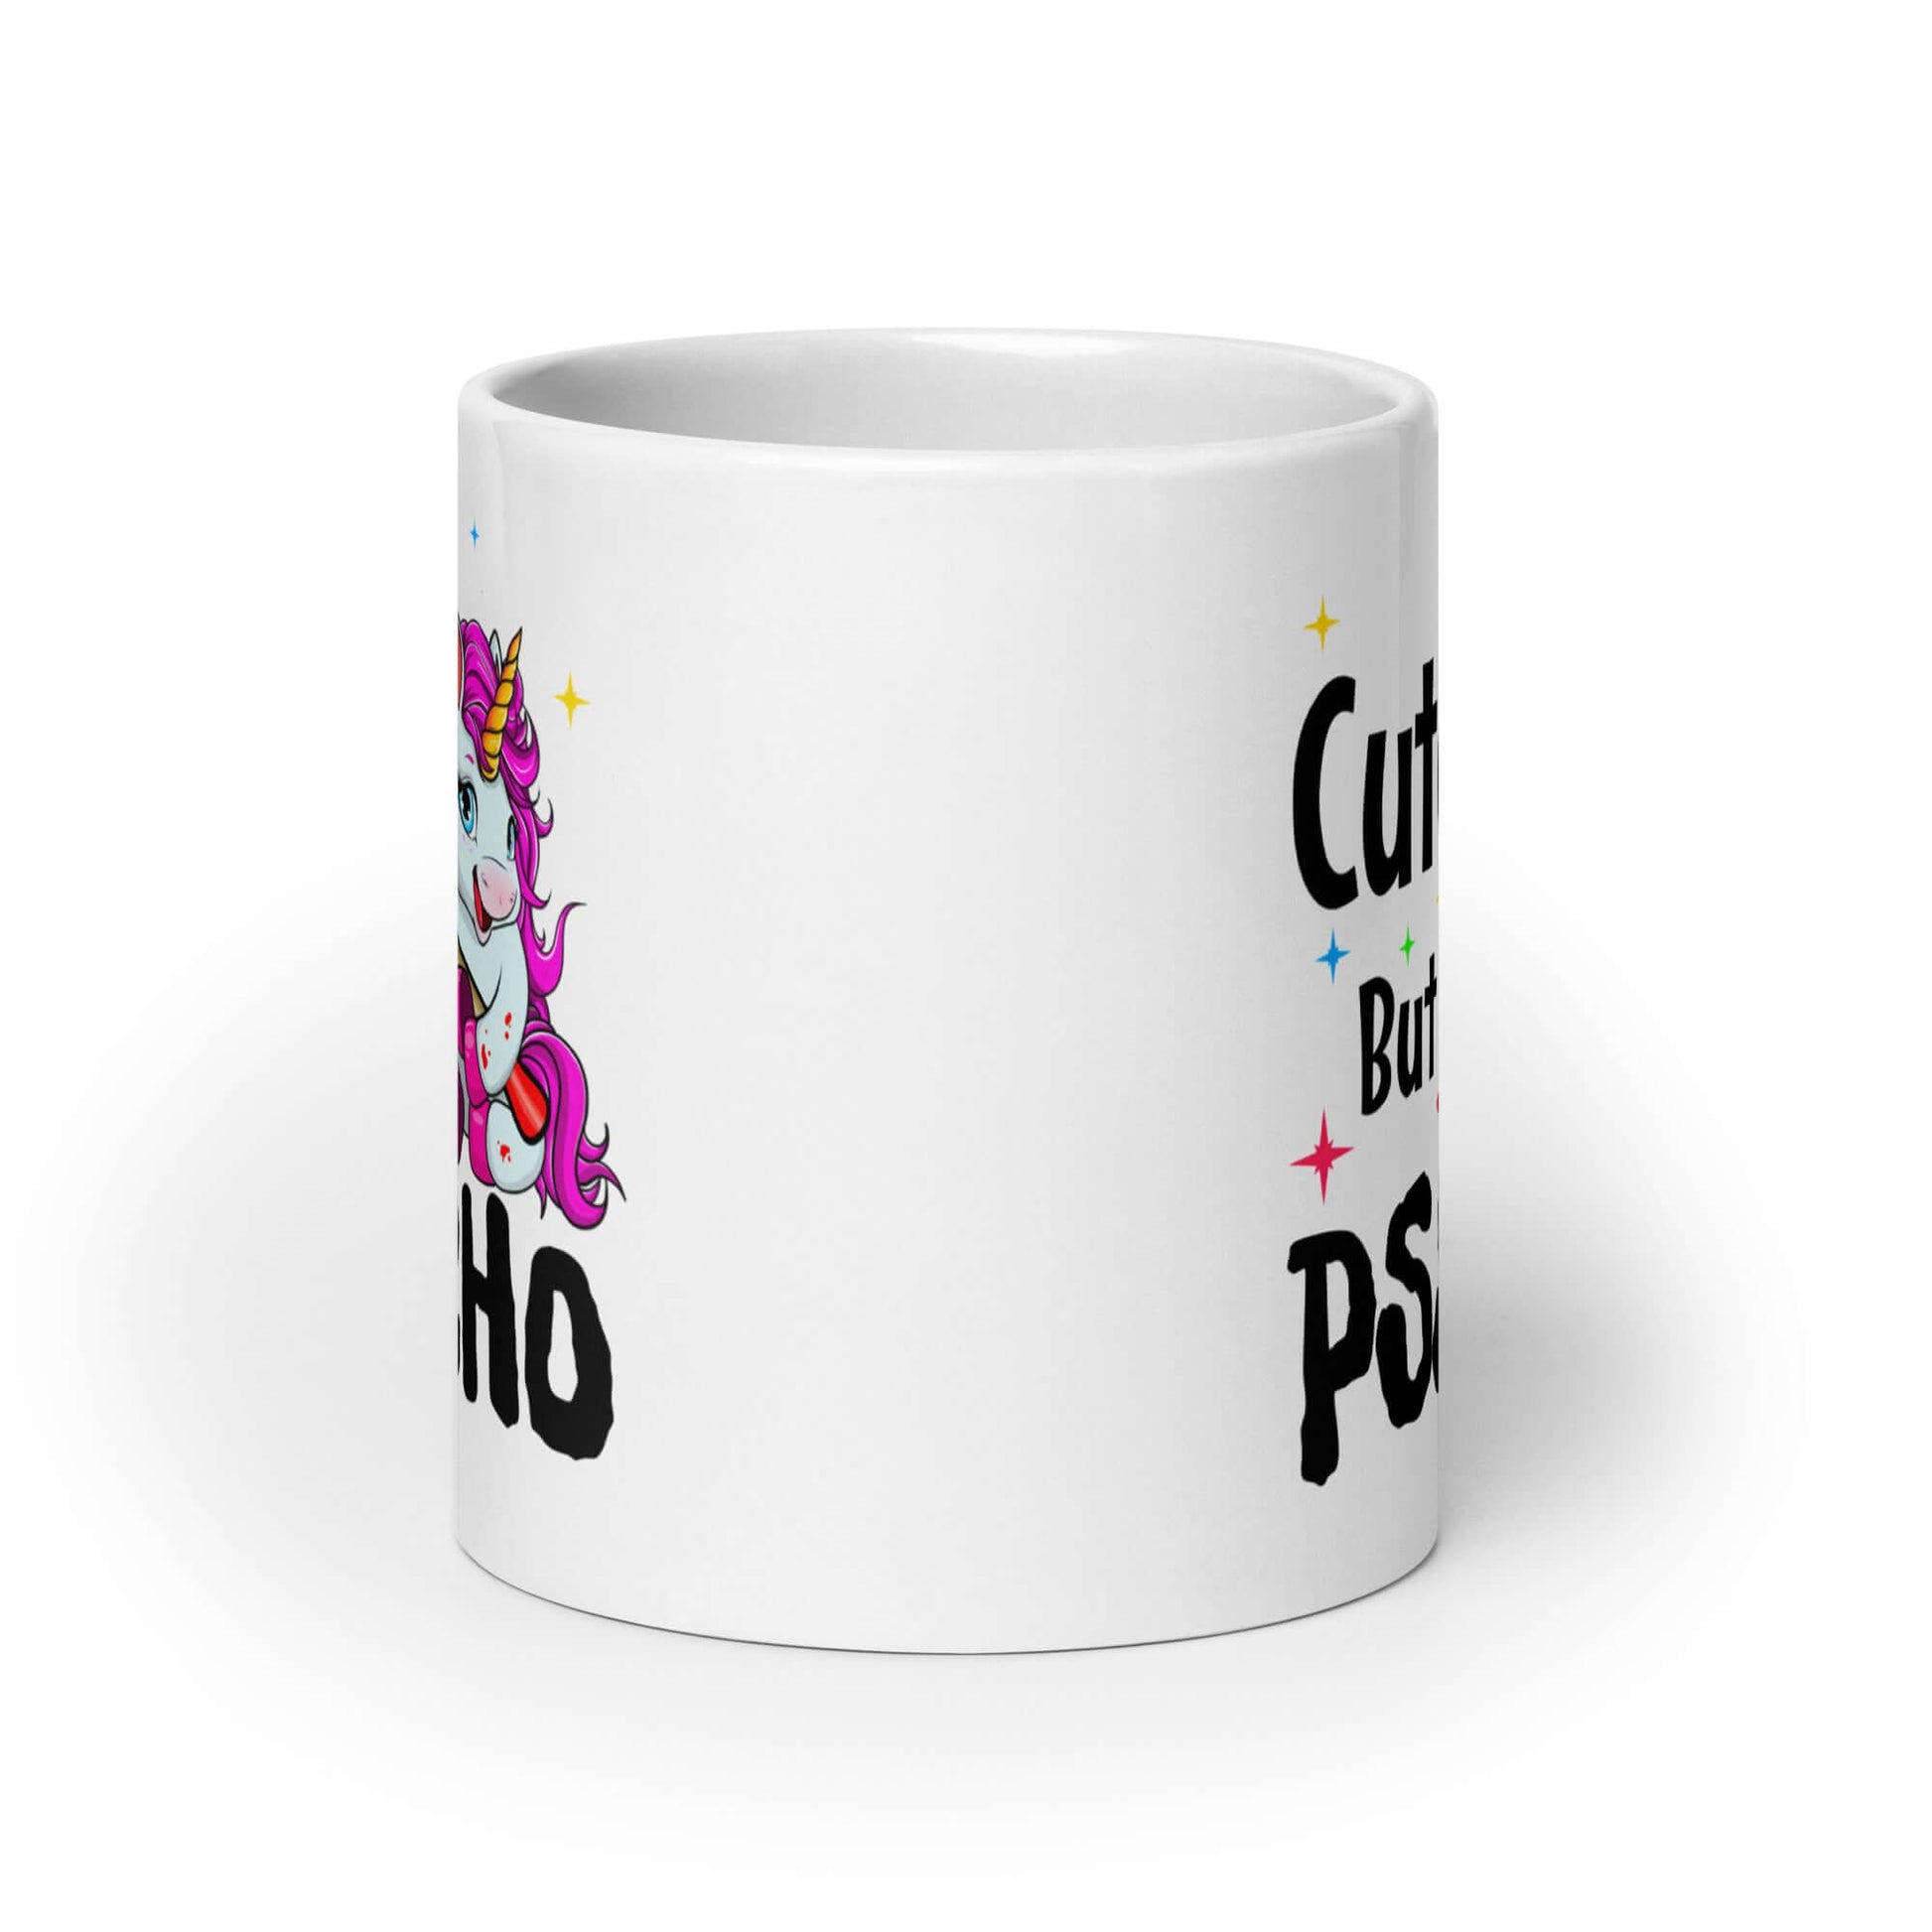 White ceramic coffee mug that has a graphic of a unicorn holding a knife & the words Cute but psycho printed on both sides.